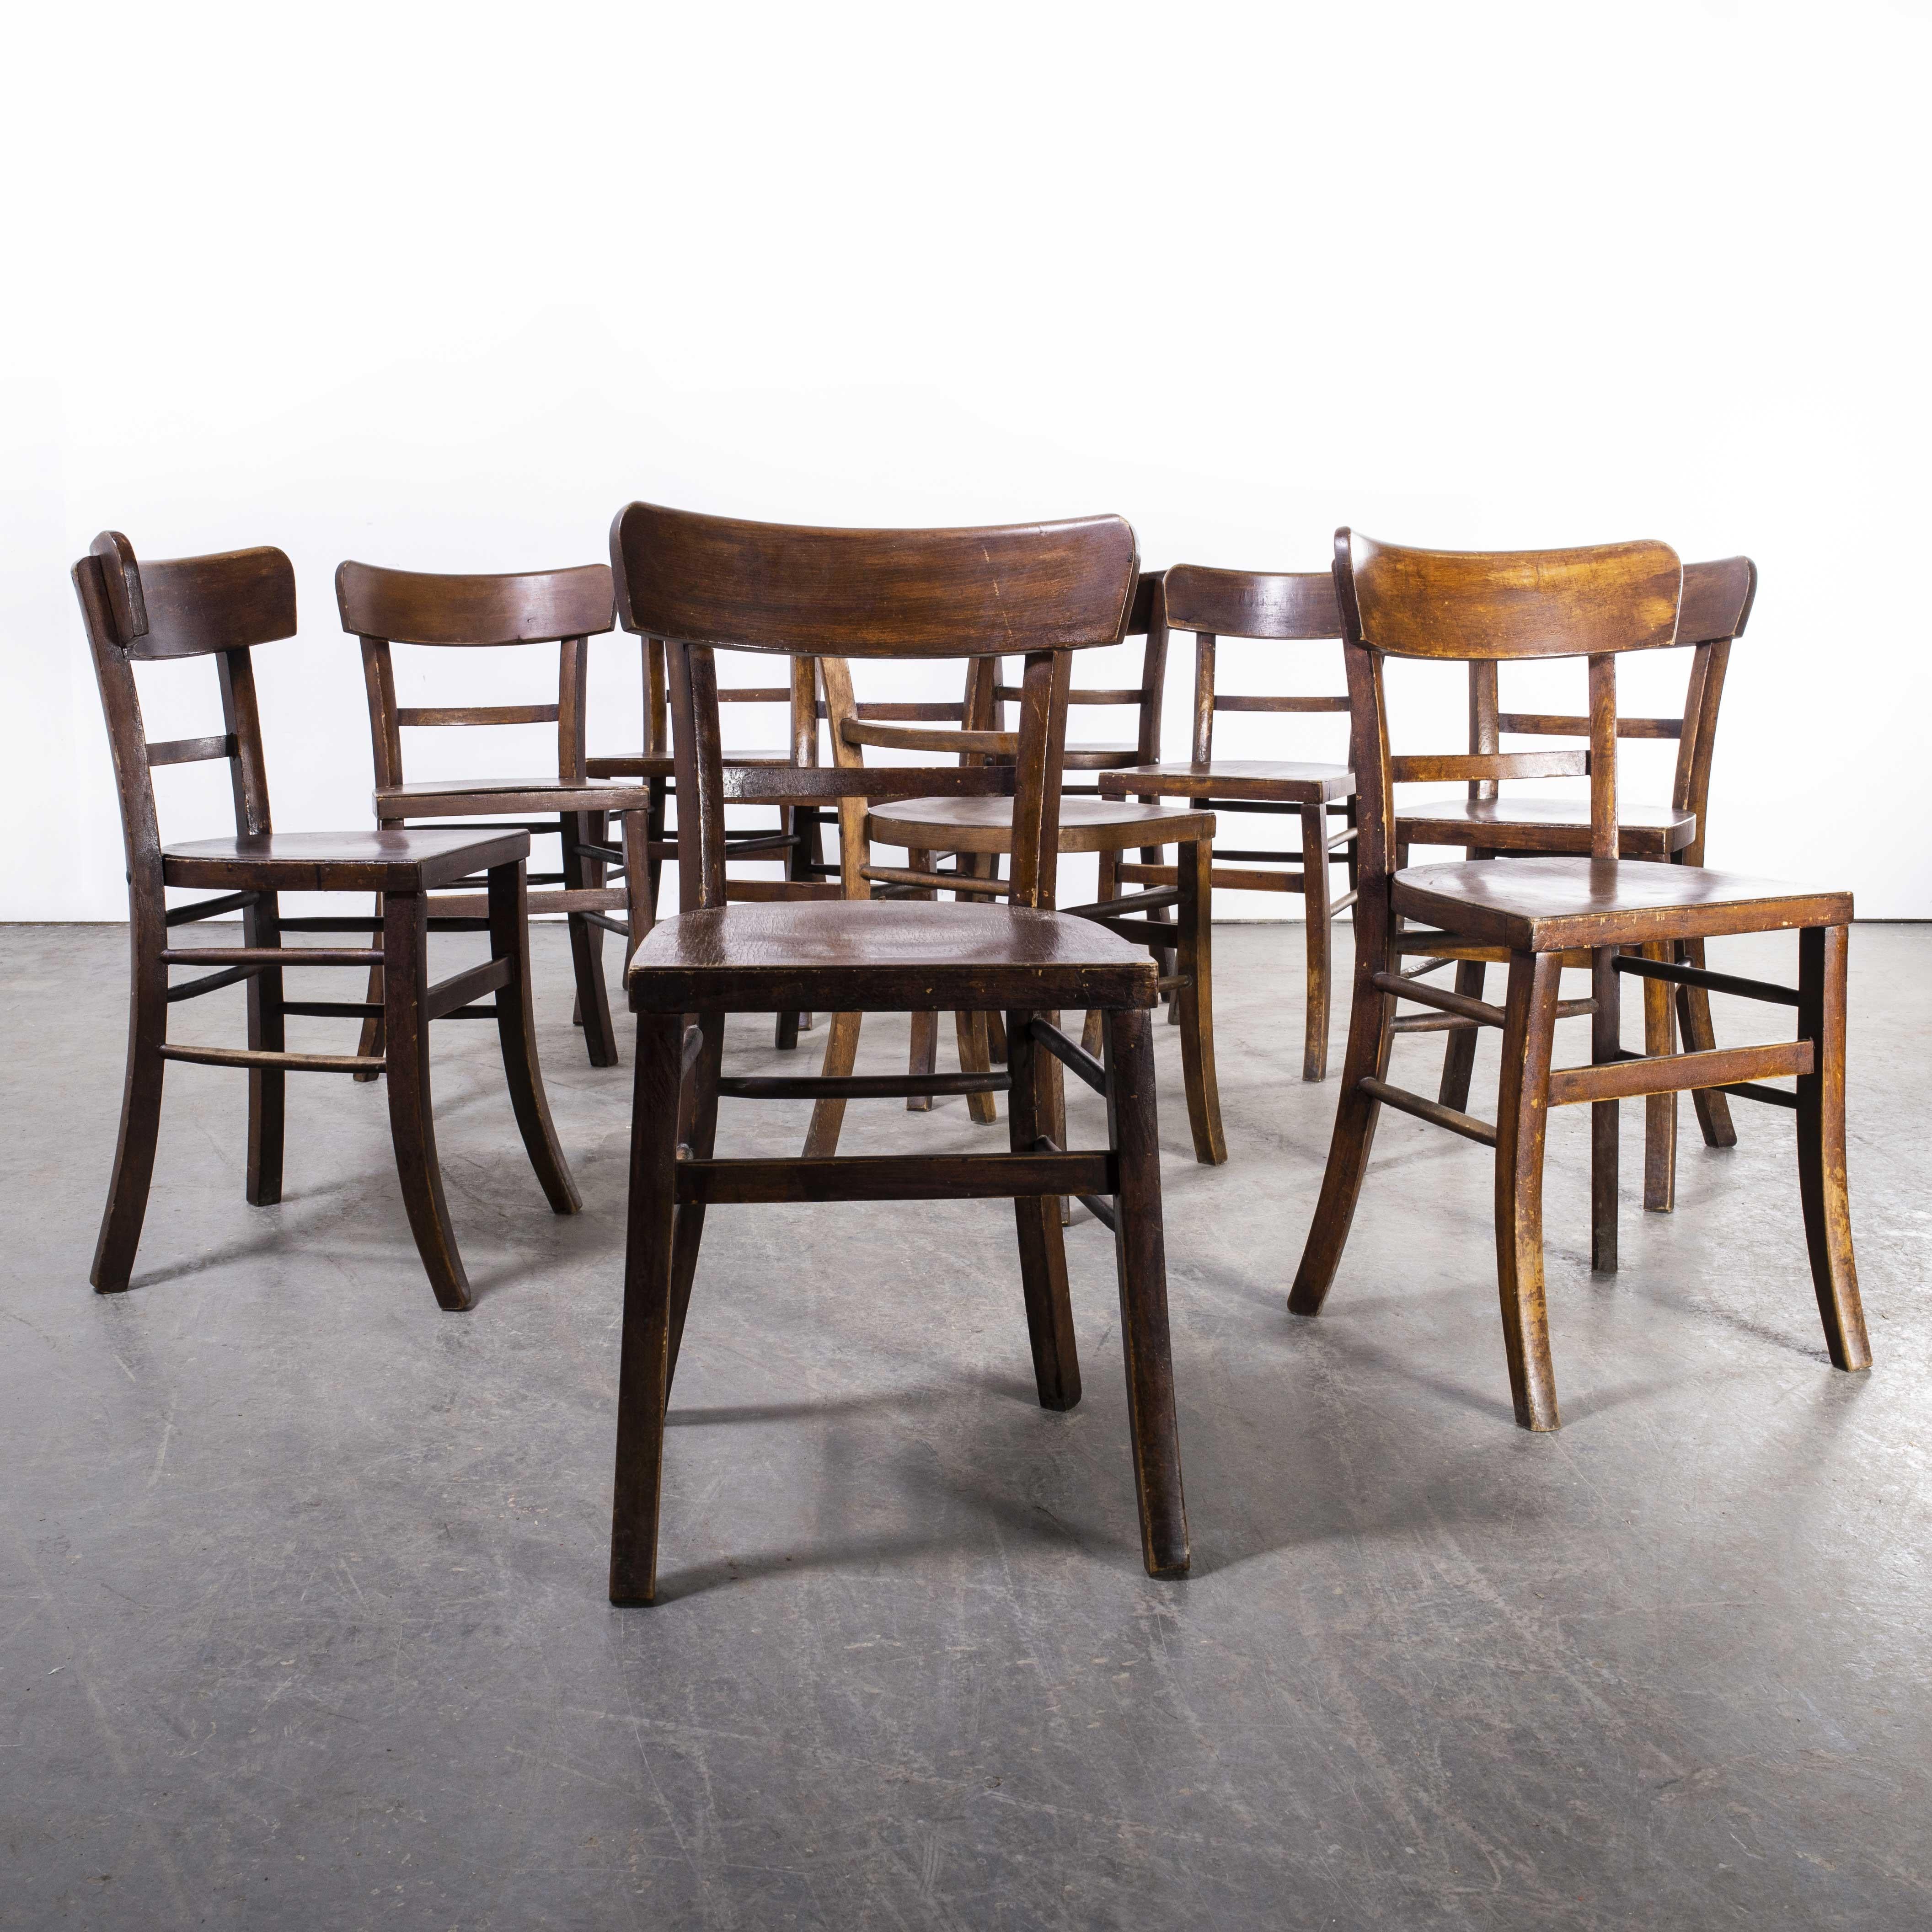 1950’s Luterma bistro bentwood dining chair – Harlequin set of ten
1950’s Luterma bistro bentwood dining chair – Harlequin set of ten The process of steam bending beech to create elegant chairs was discovered and developed by Thonet, but when its